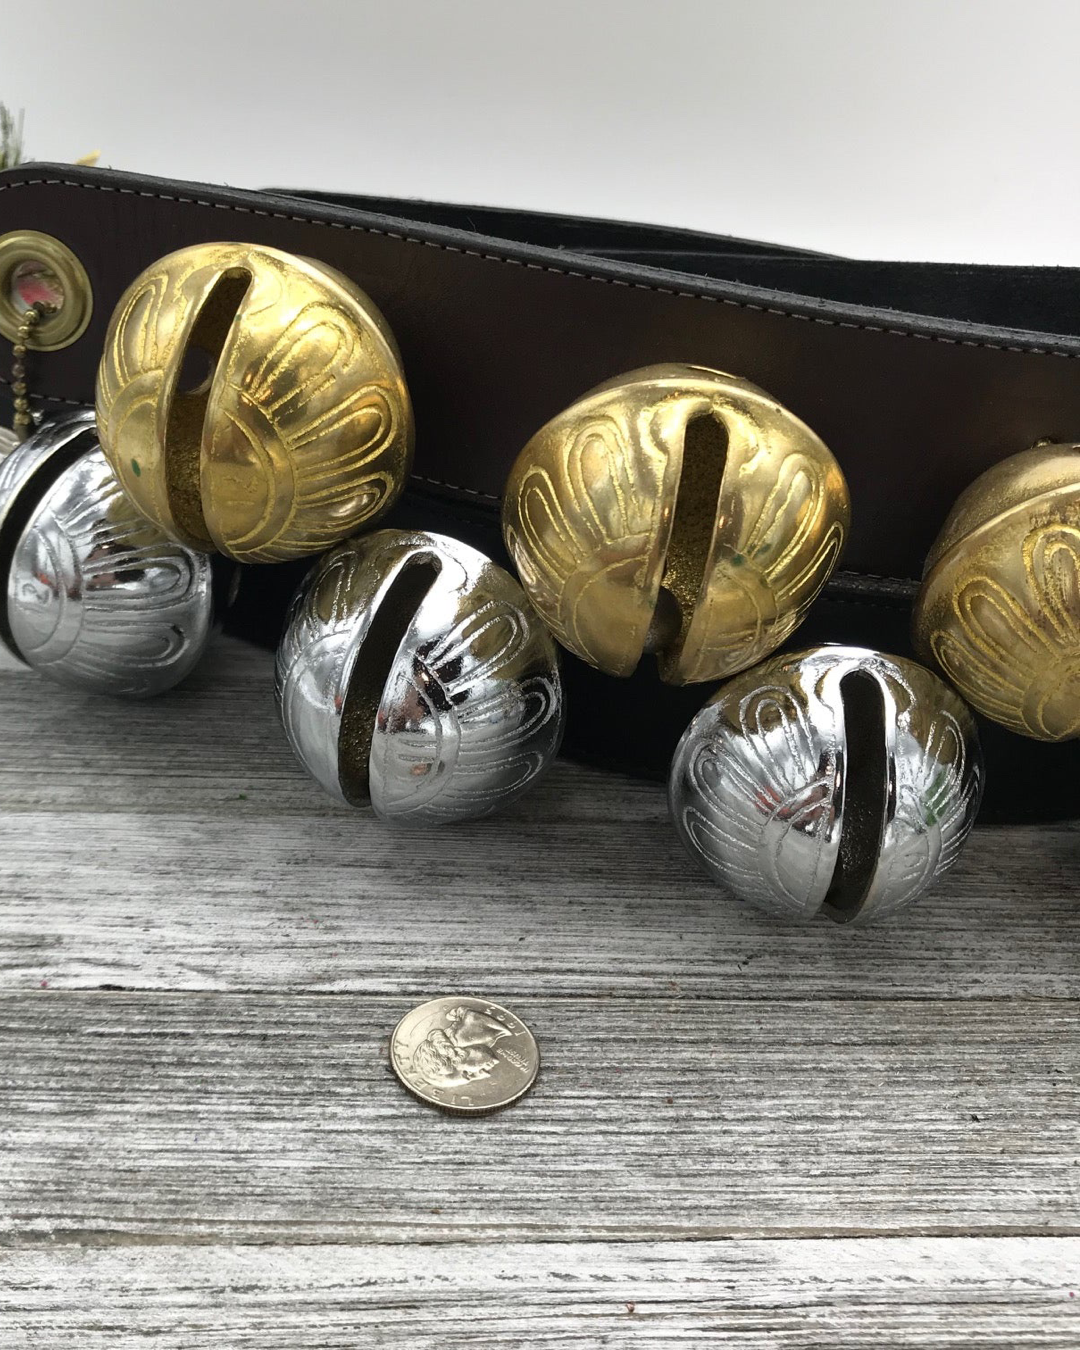 12 Authentic Graduating Solid Brass Sleigh Bells, Leather Sleigh Bells Set, Handmade In USA.